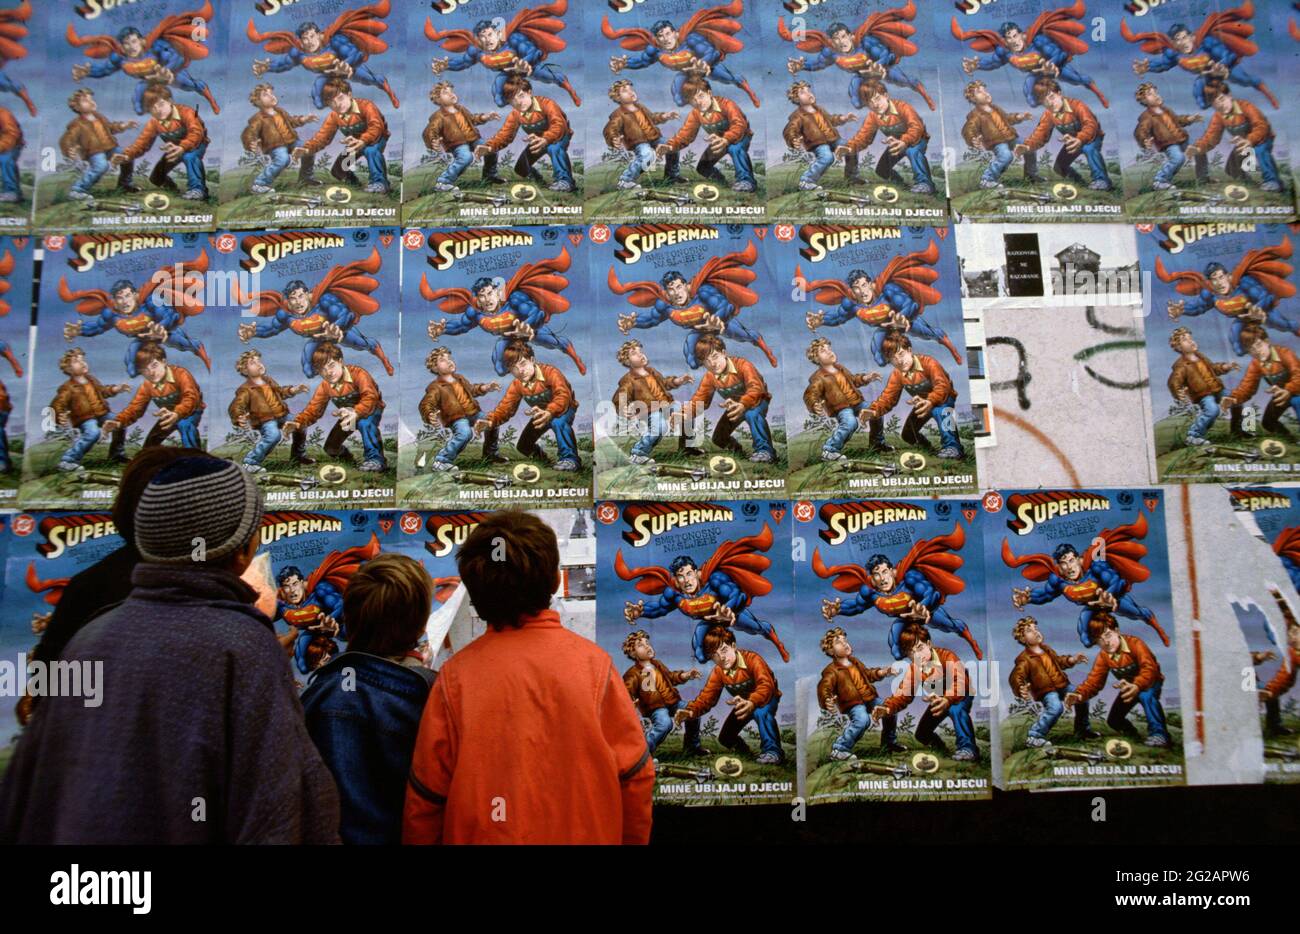 Sarajevo, Bosnia and Herzegovina. March 1997. Children in the city look at posters for 'Superman: Deadly Legacy' a special-edition 'humanitarian comic book' featuring Superman that promotes “landmine awareness' among children, particularly from countries where there are active landmines after war. The Superman comic book was published by DC Comics, the United States government, and United Nations International Children's Emergency Fund (UNICEF) in 1996. The Bosnian War, ethnically rooted war in Bosnia and Herzegovina that took place from 1992 to 1995 in Former Yugoslavia. Stock Photo